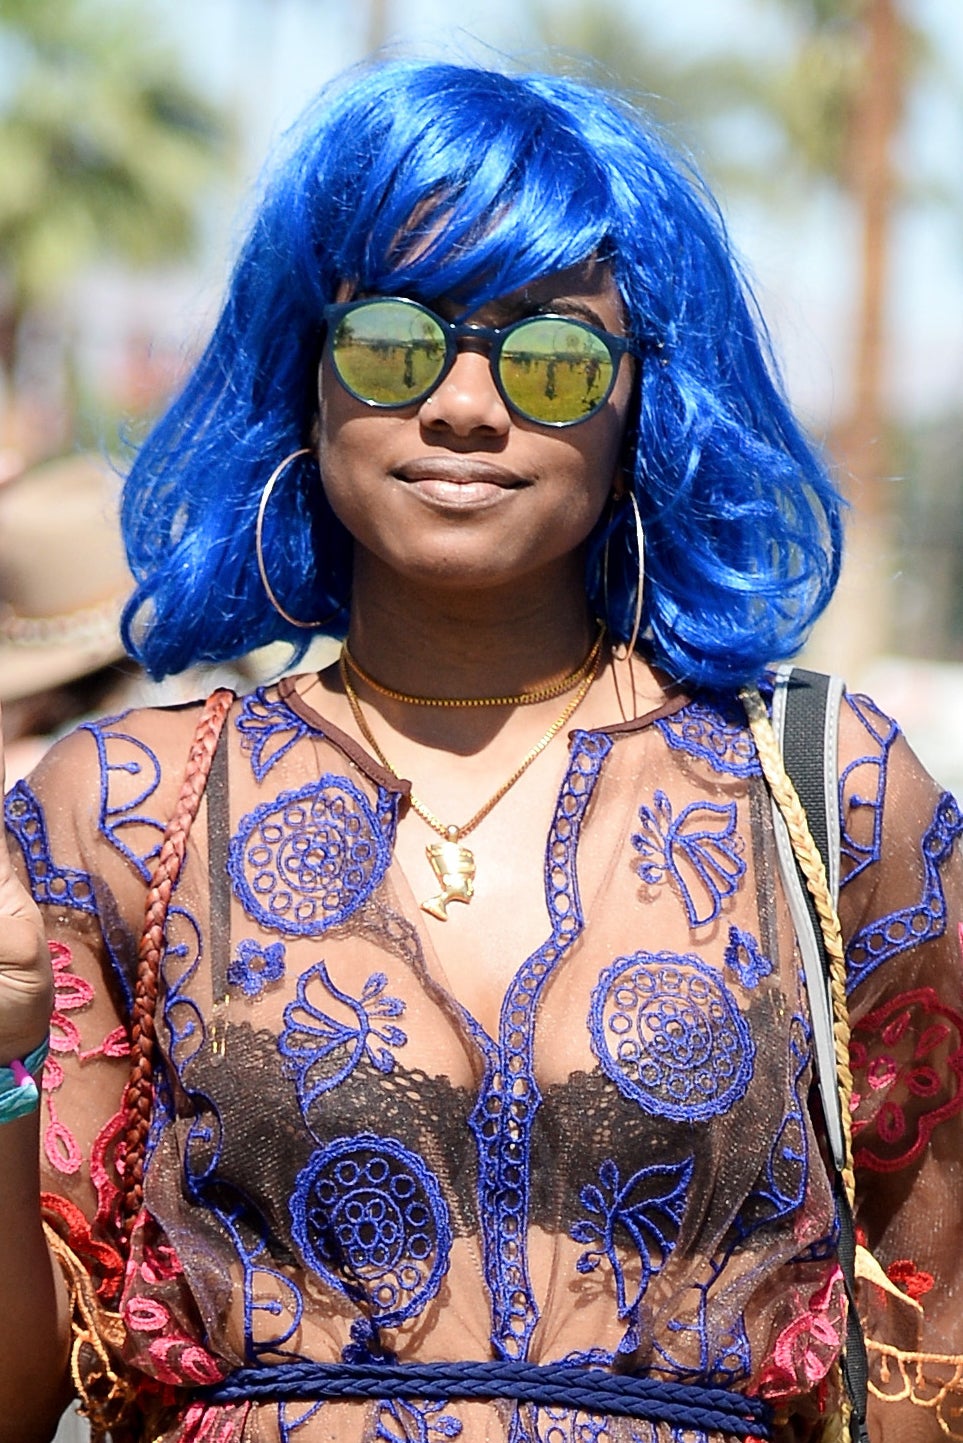 The Best Black Hairstyles at Coachella 2016
